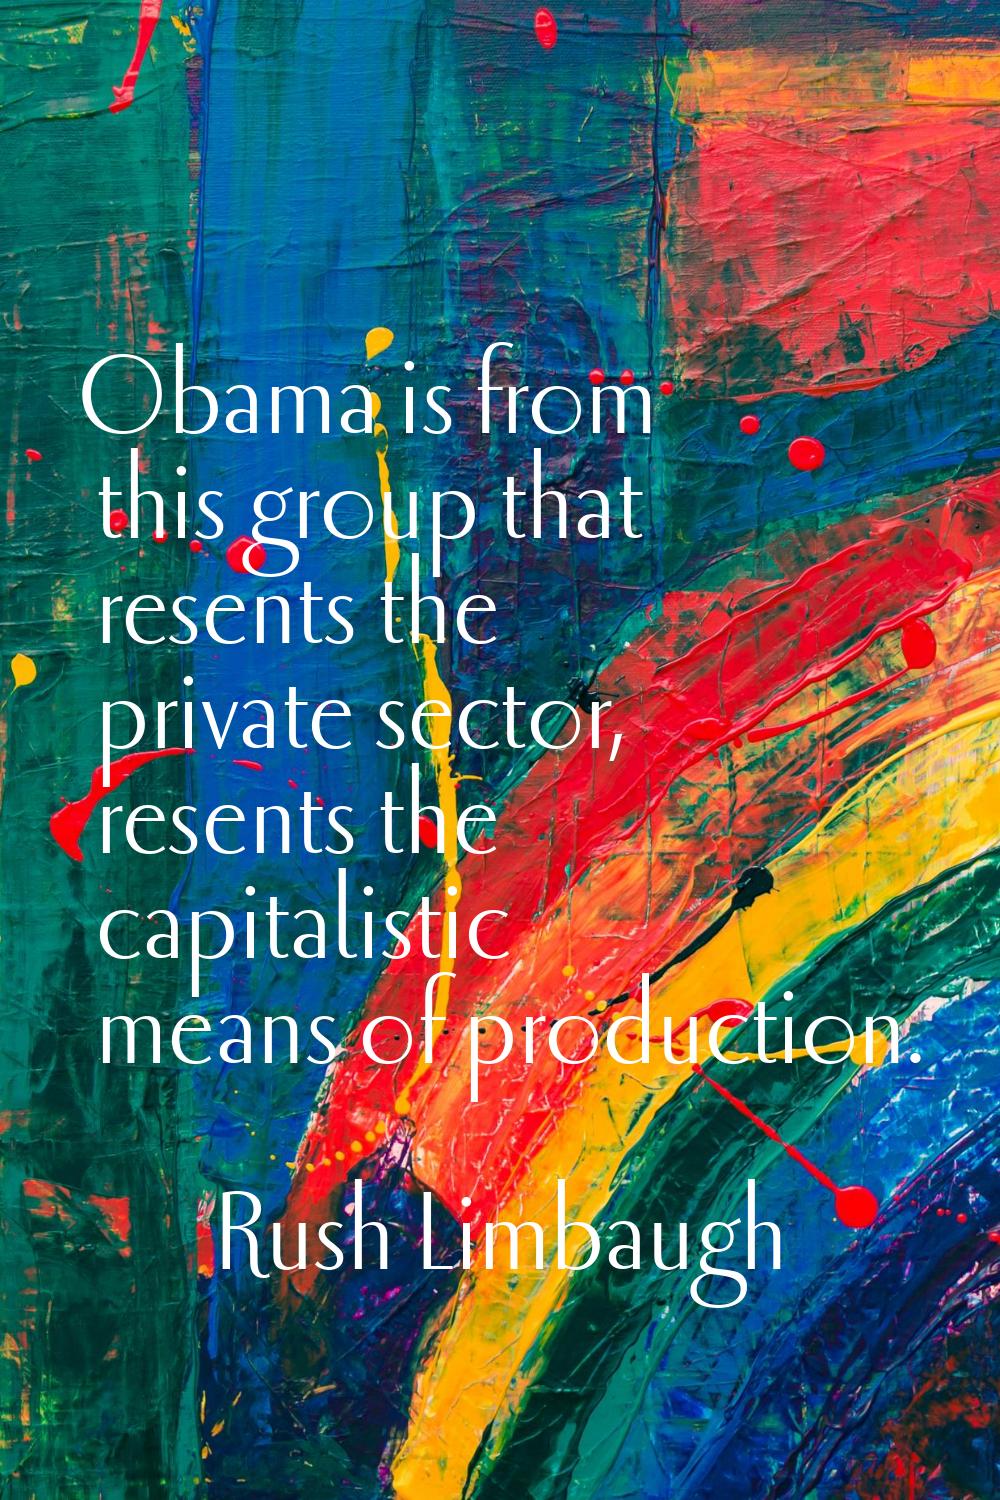 Obama is from this group that resents the private sector, resents the capitalistic means of product